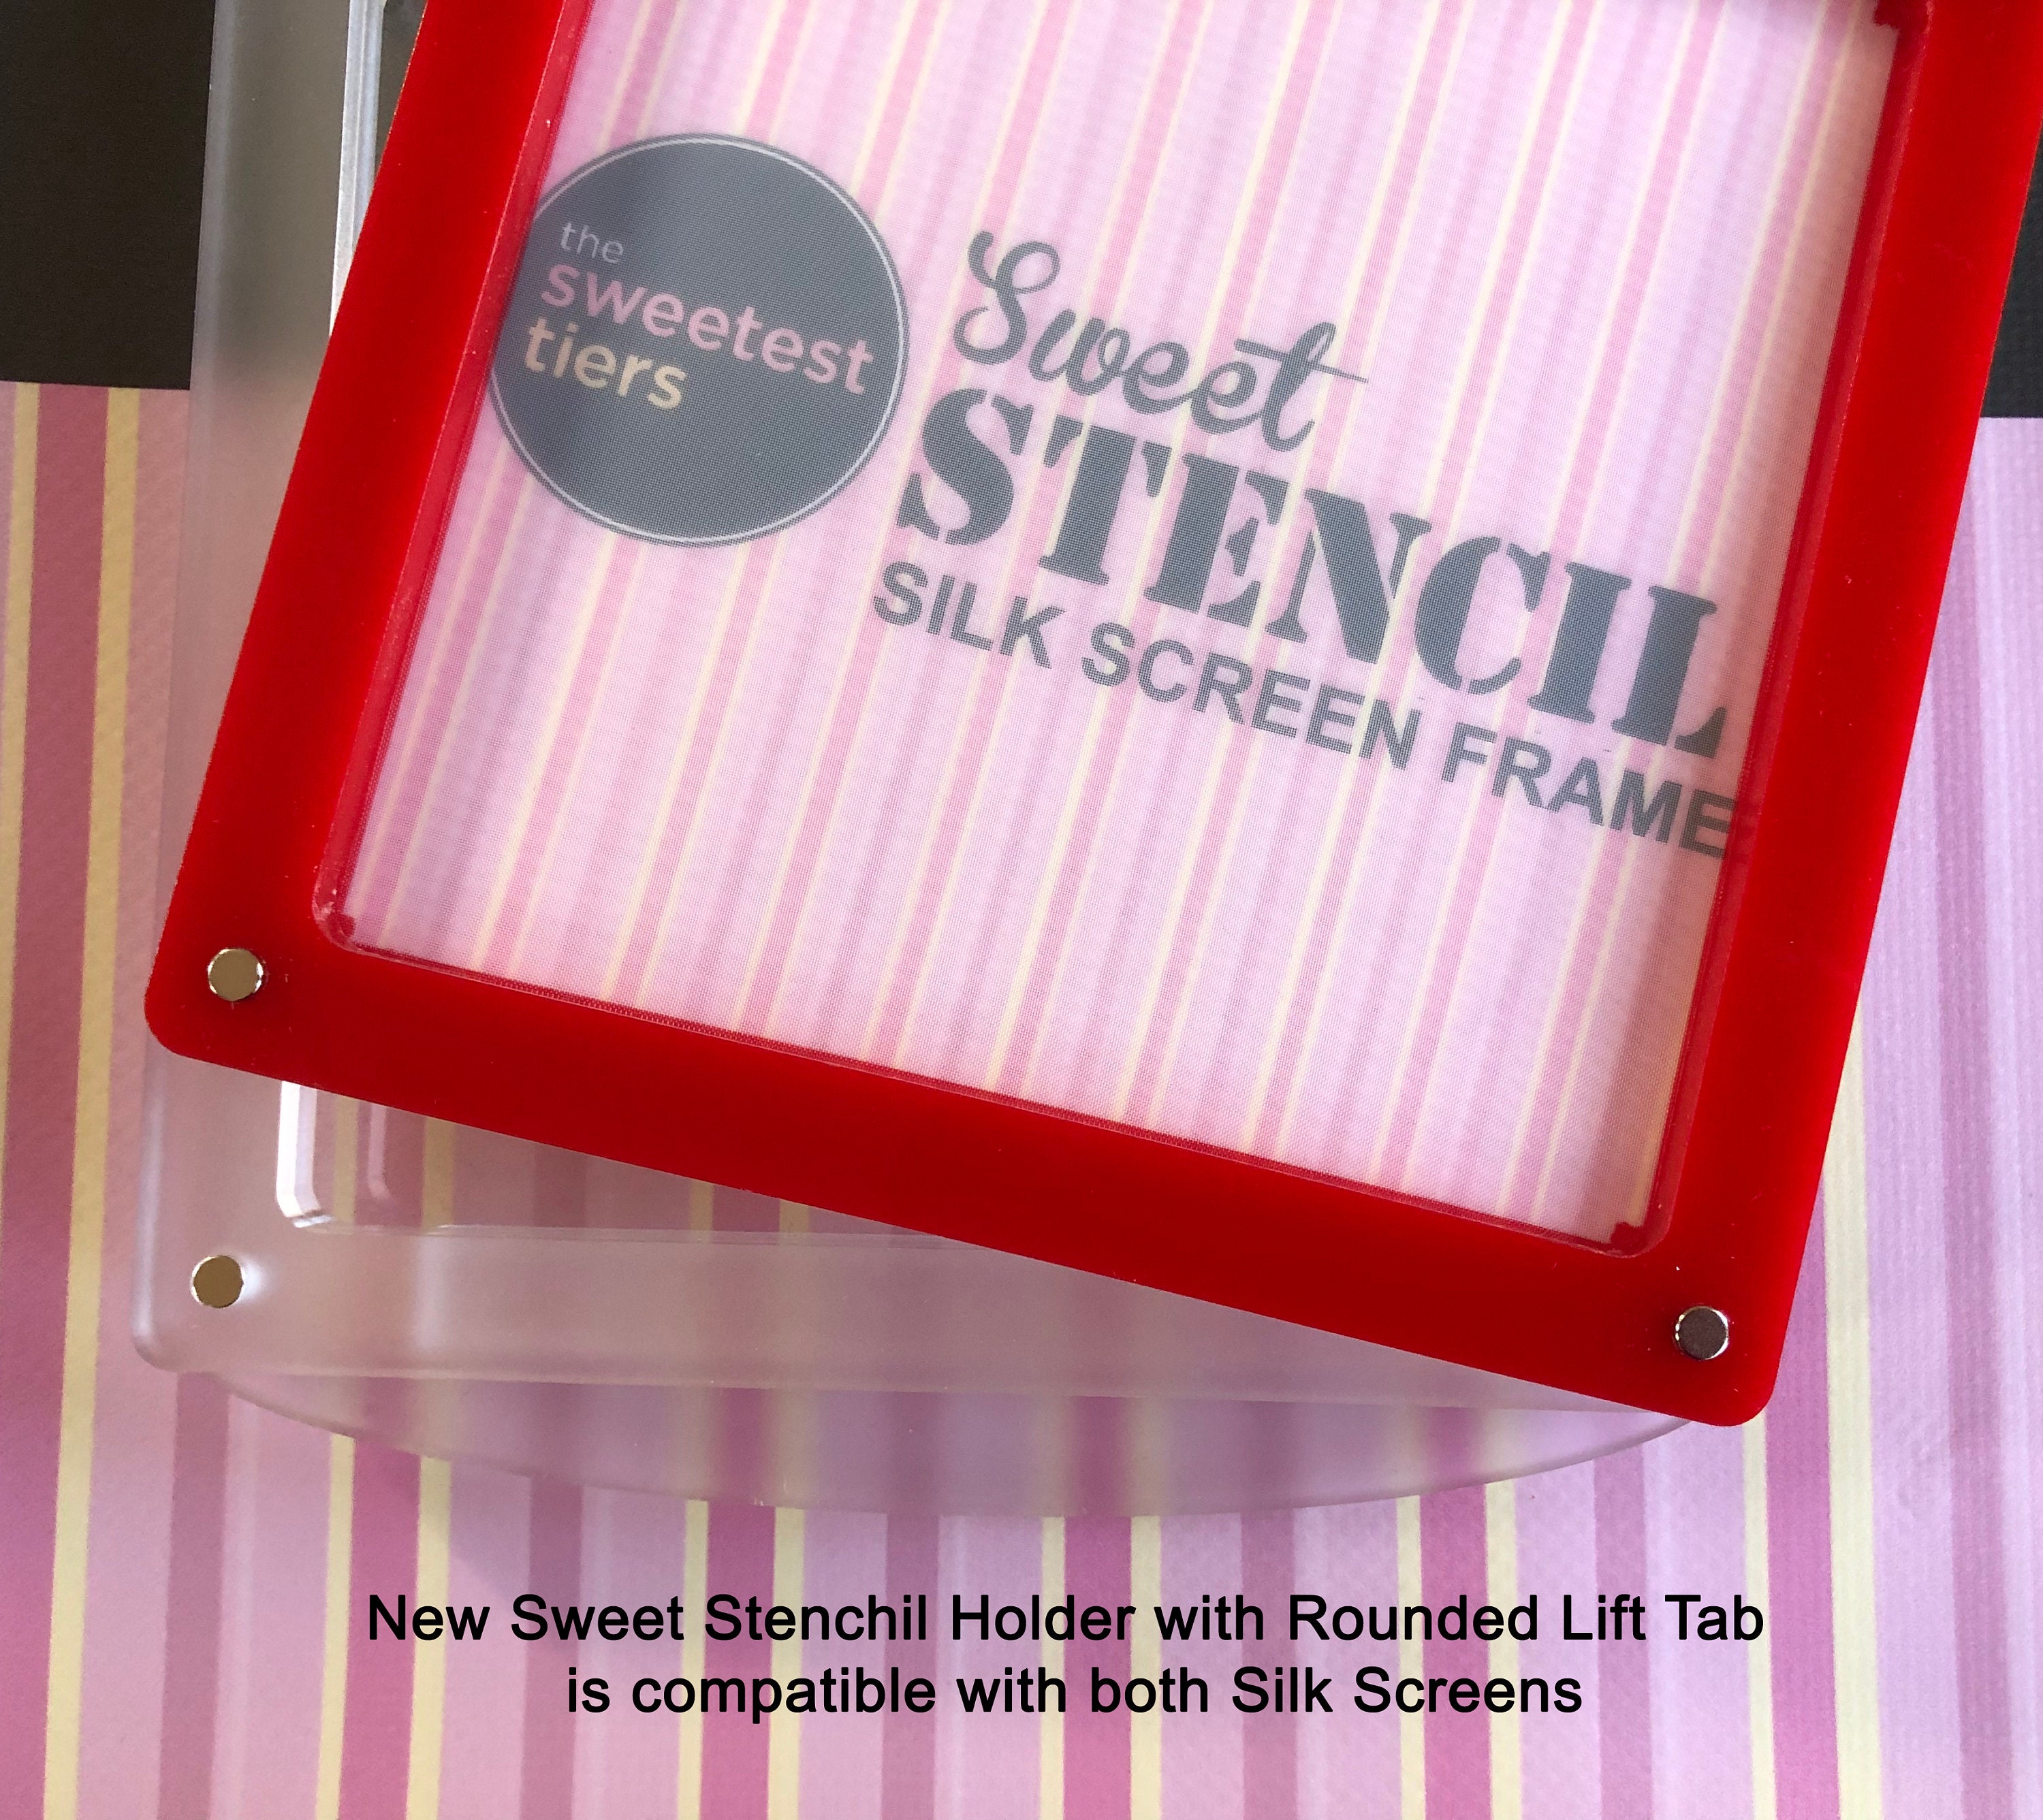 Sweet Stencil Holder Extender Set - 3mm extender frame for thicker rolled  cookies